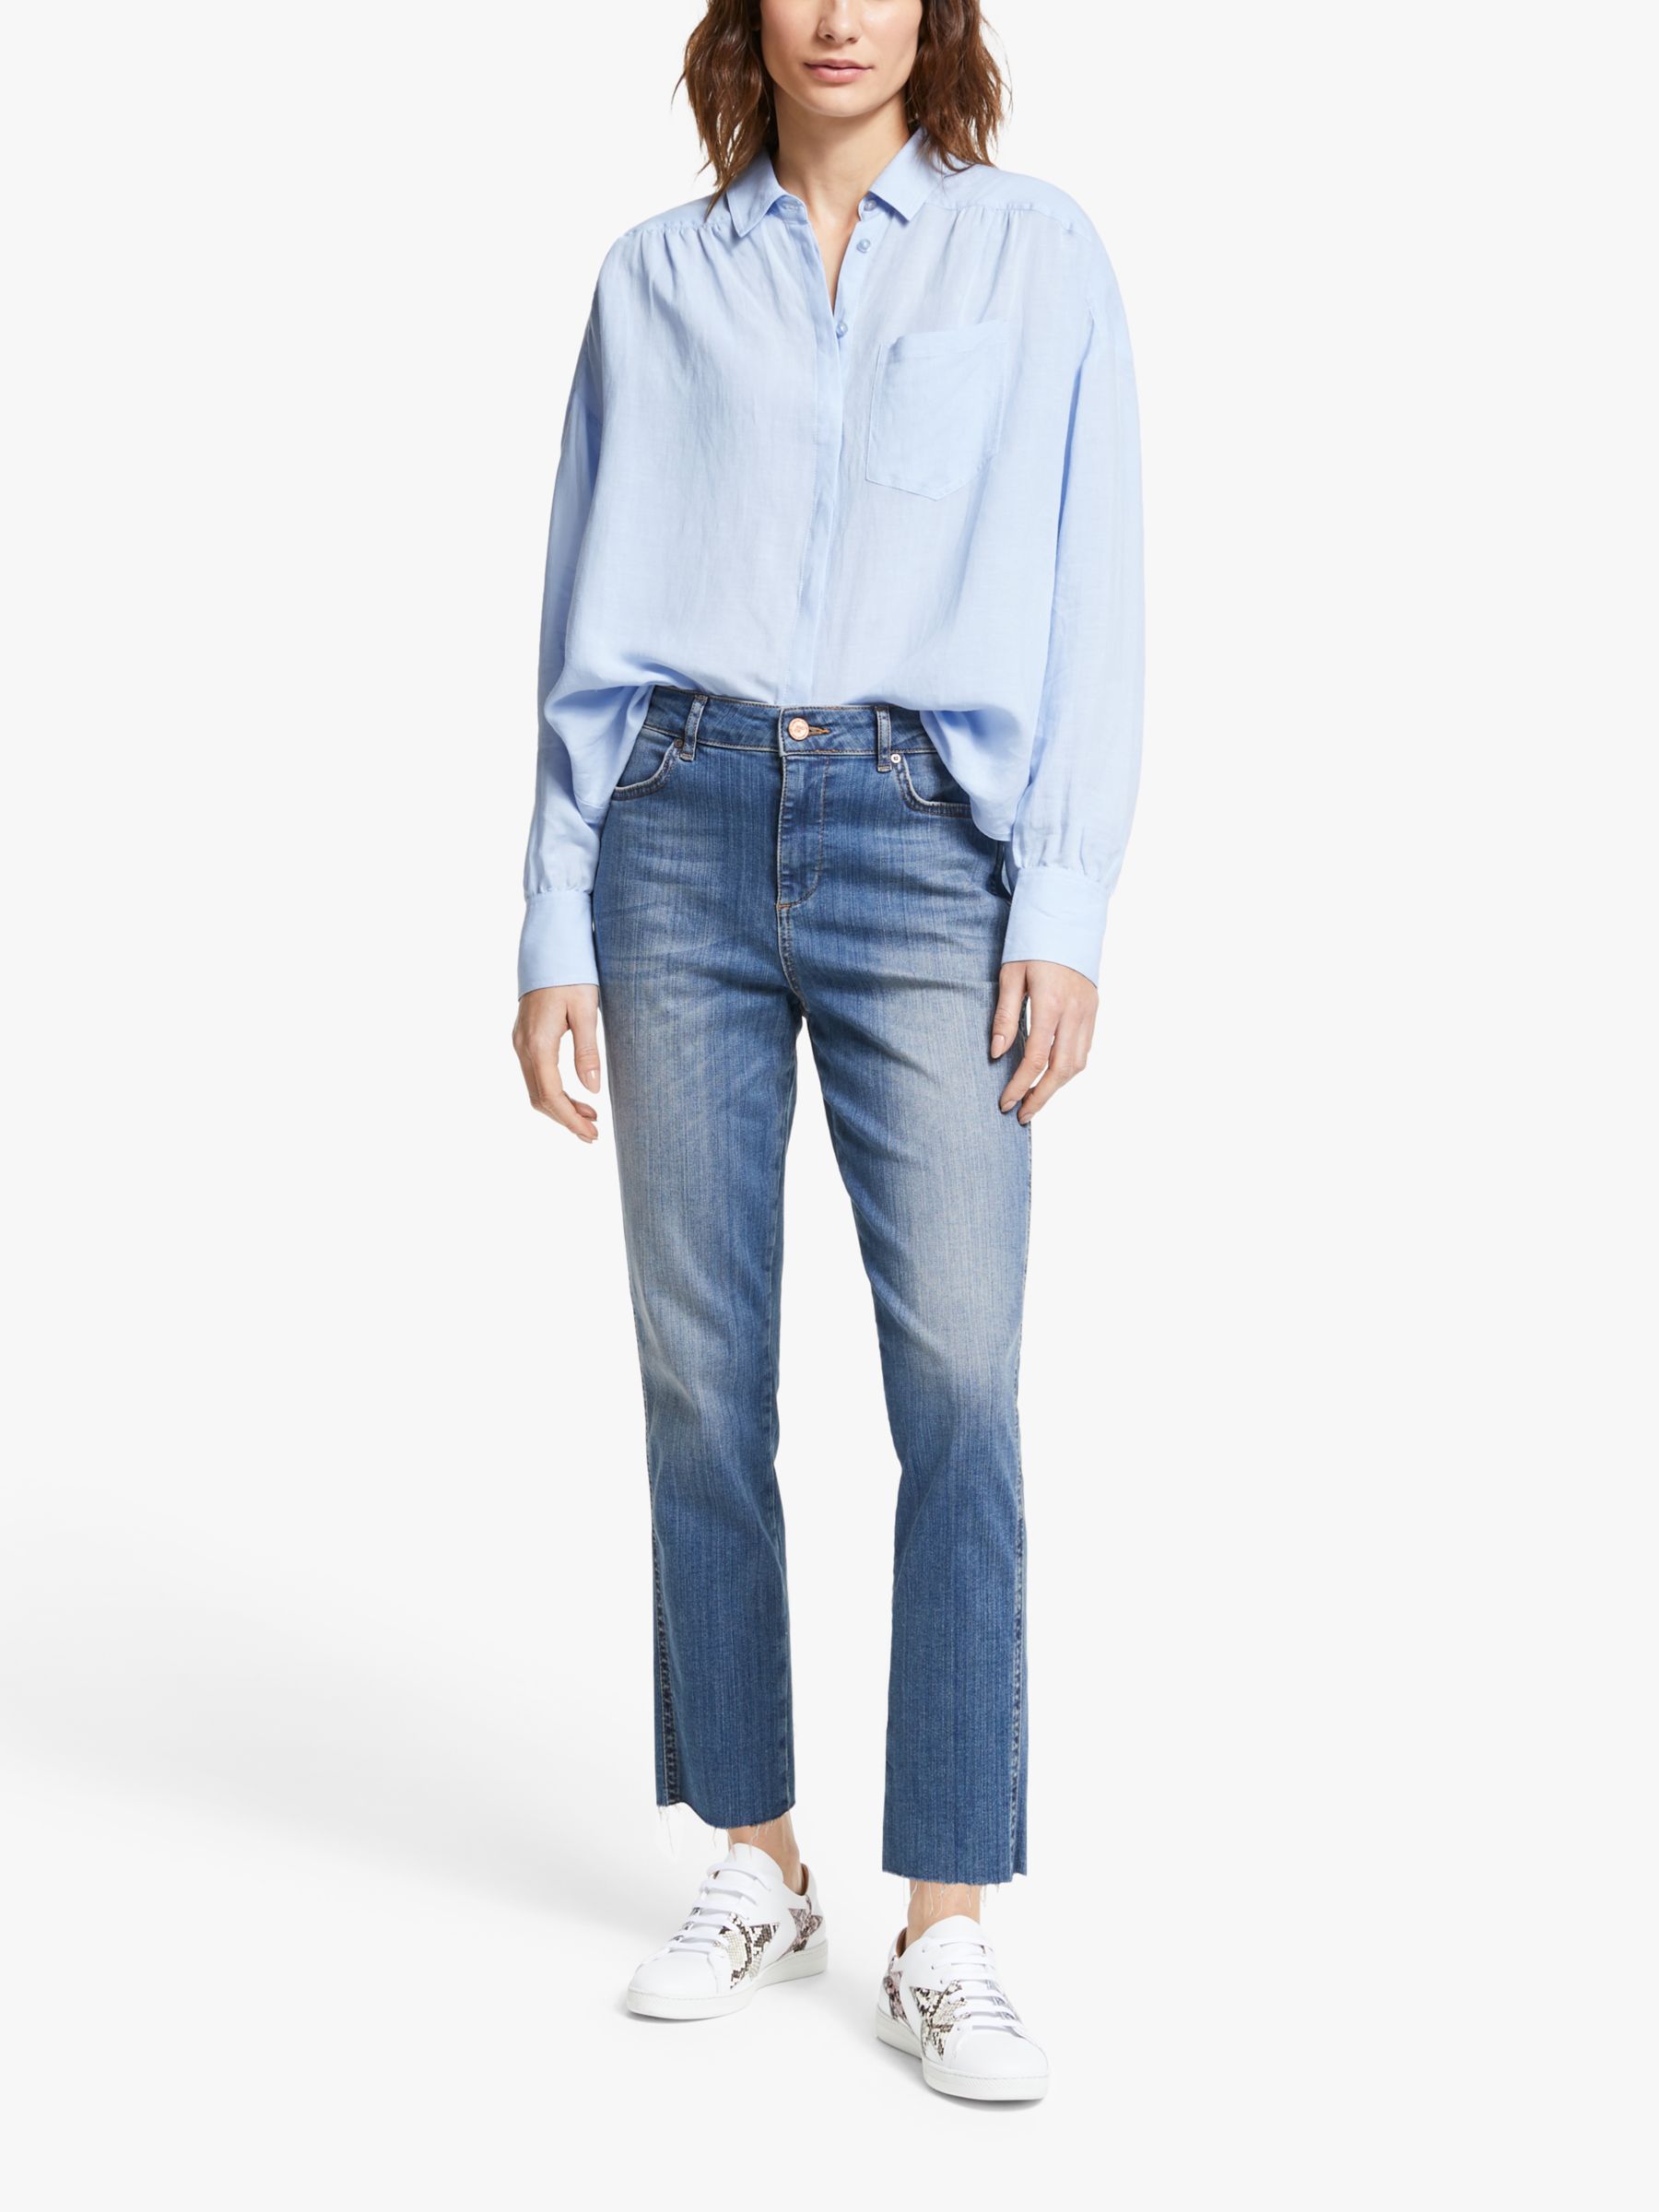 AND/OR Abby Plain Shirt, Pale Blue